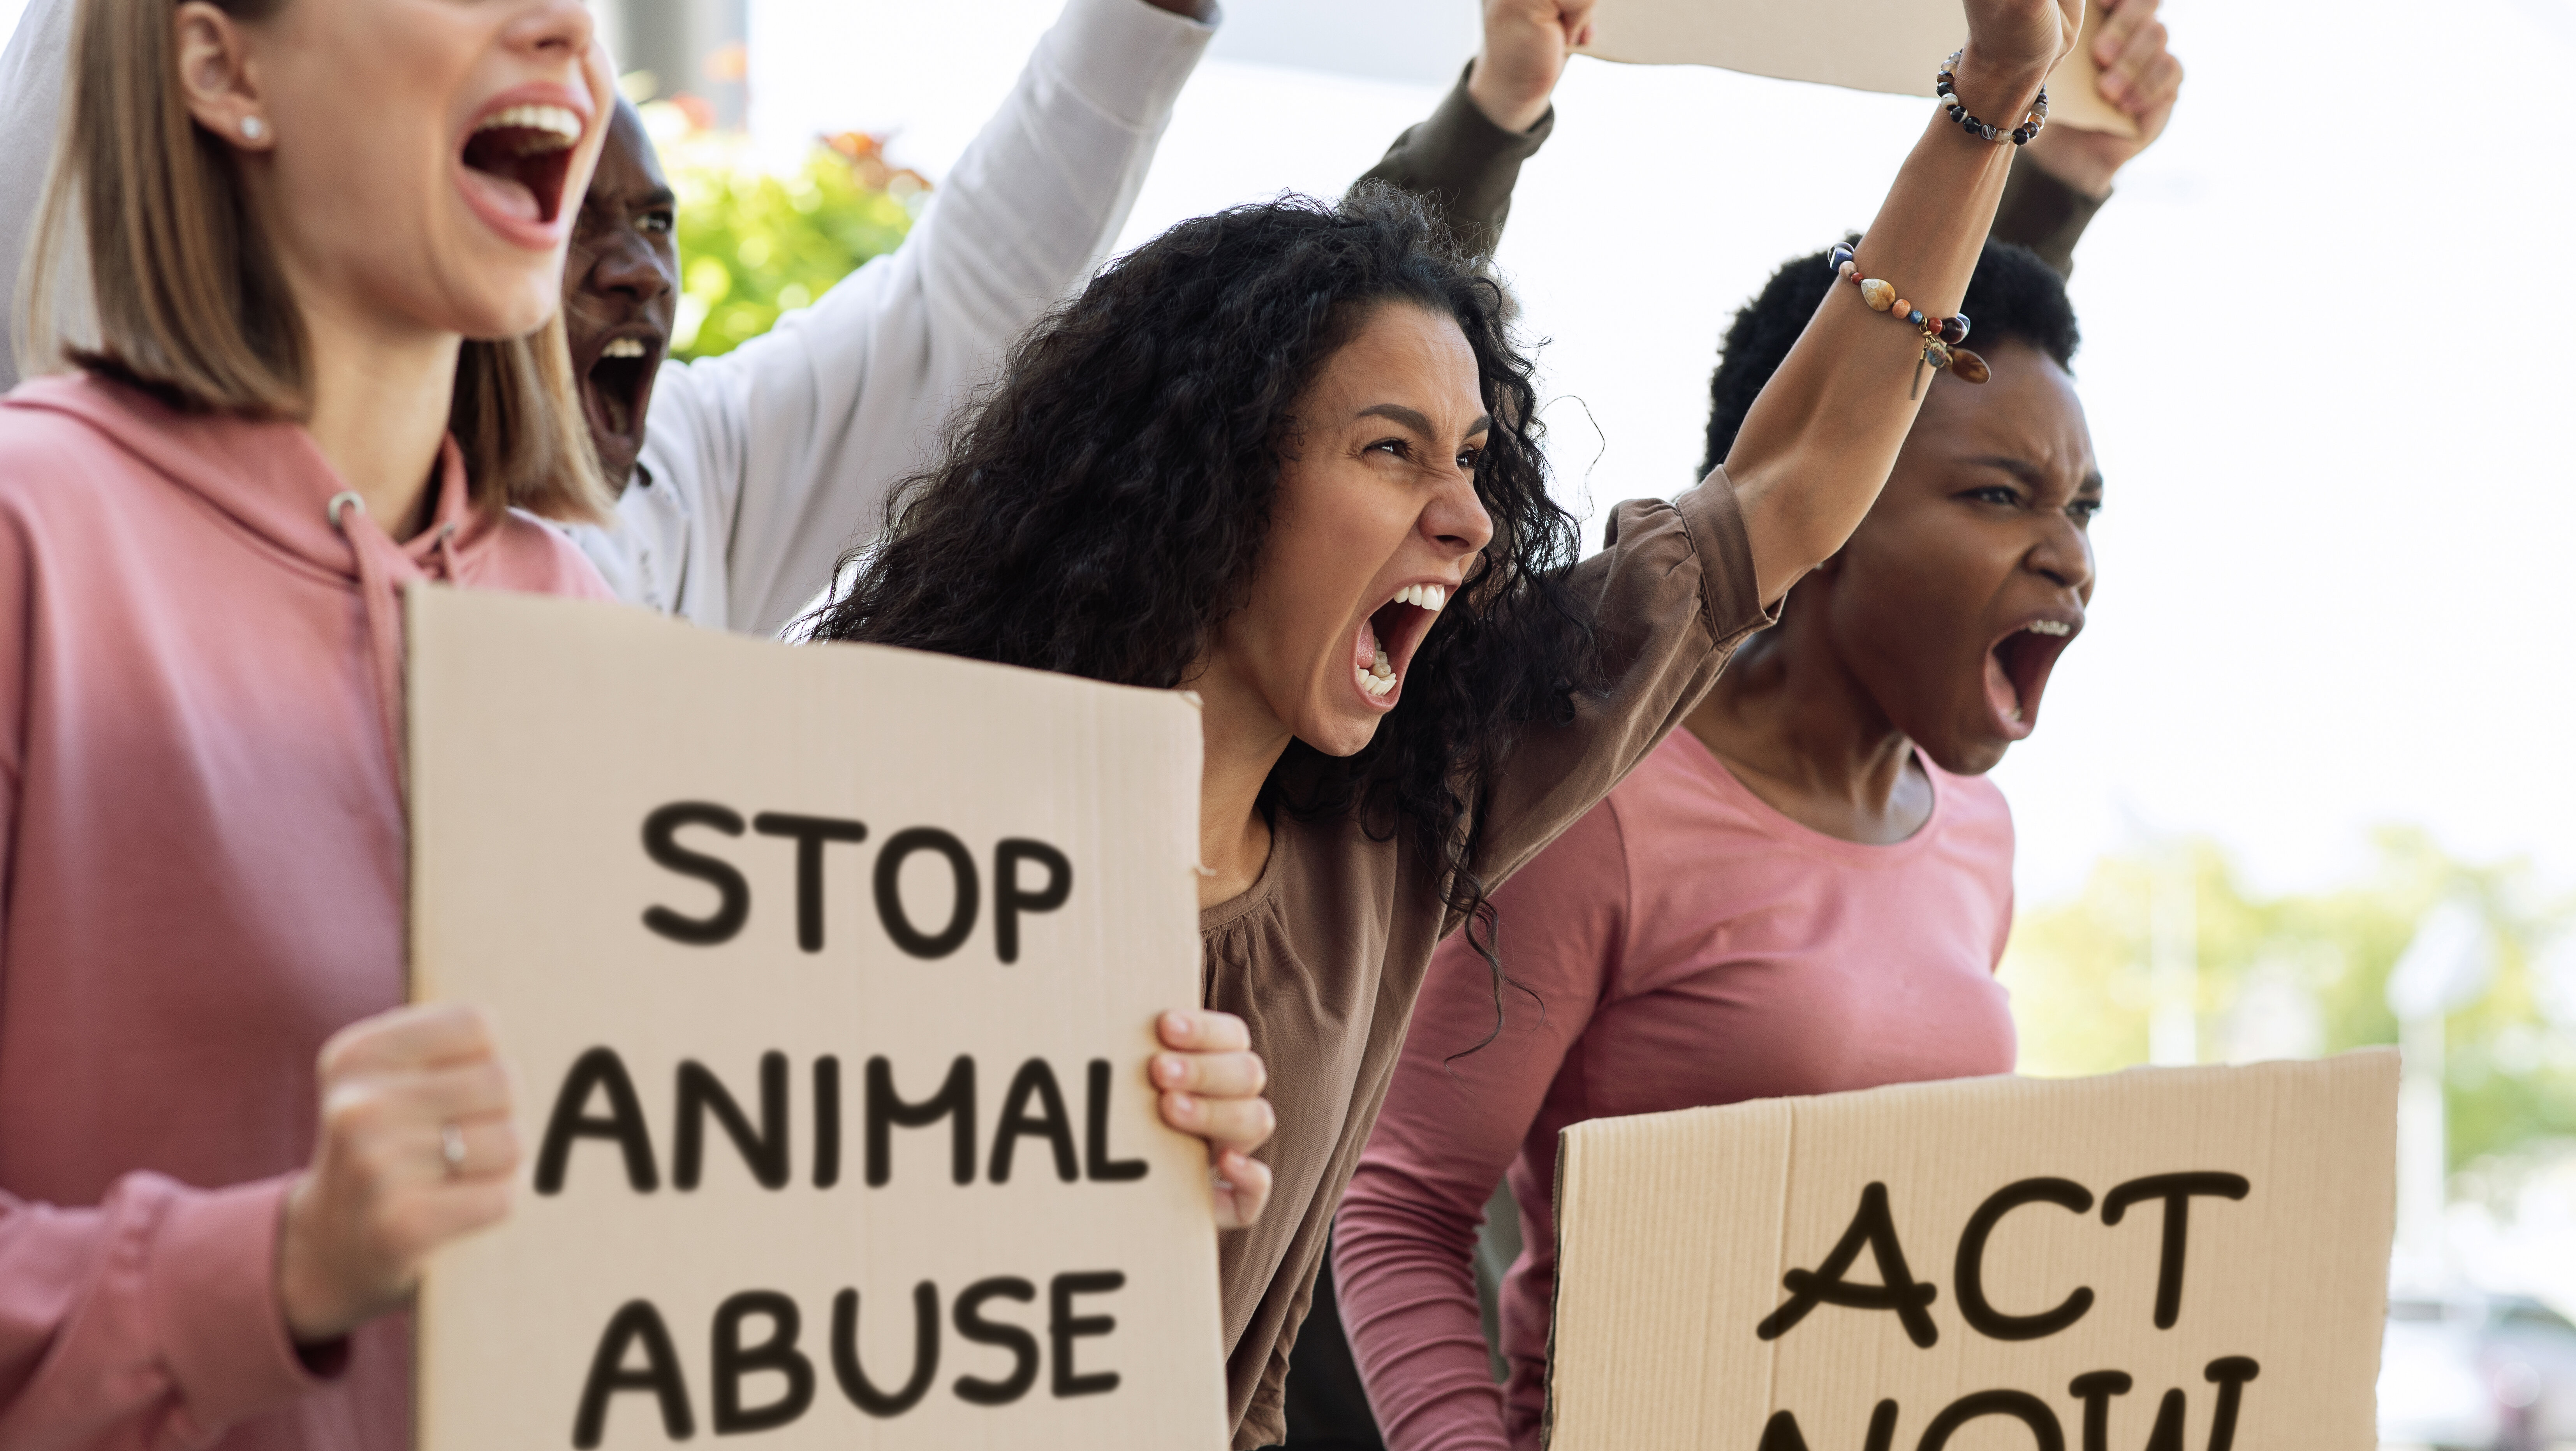 Celebrating Animal Rights Awareness Week: Promoting Compassion and Action